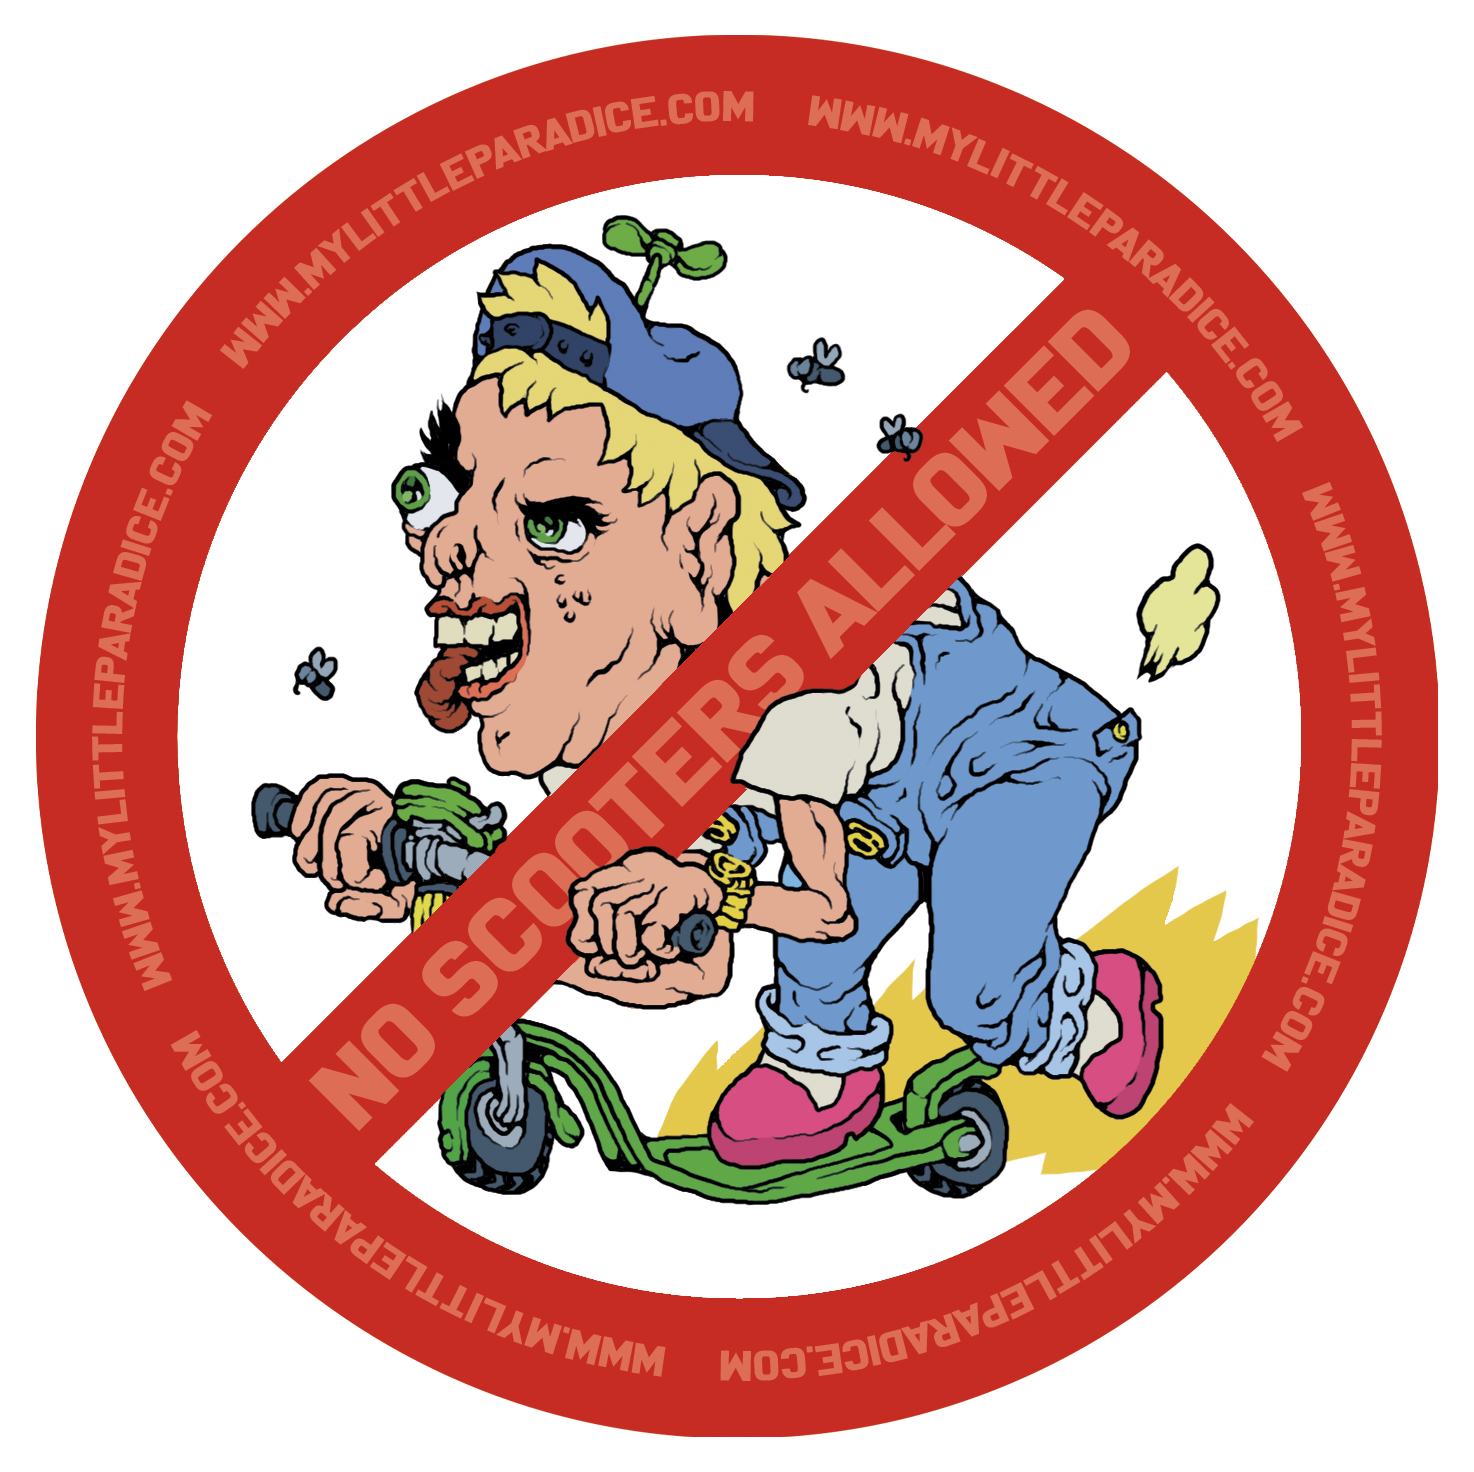 NO SCOOTERS ALLOWED sticker